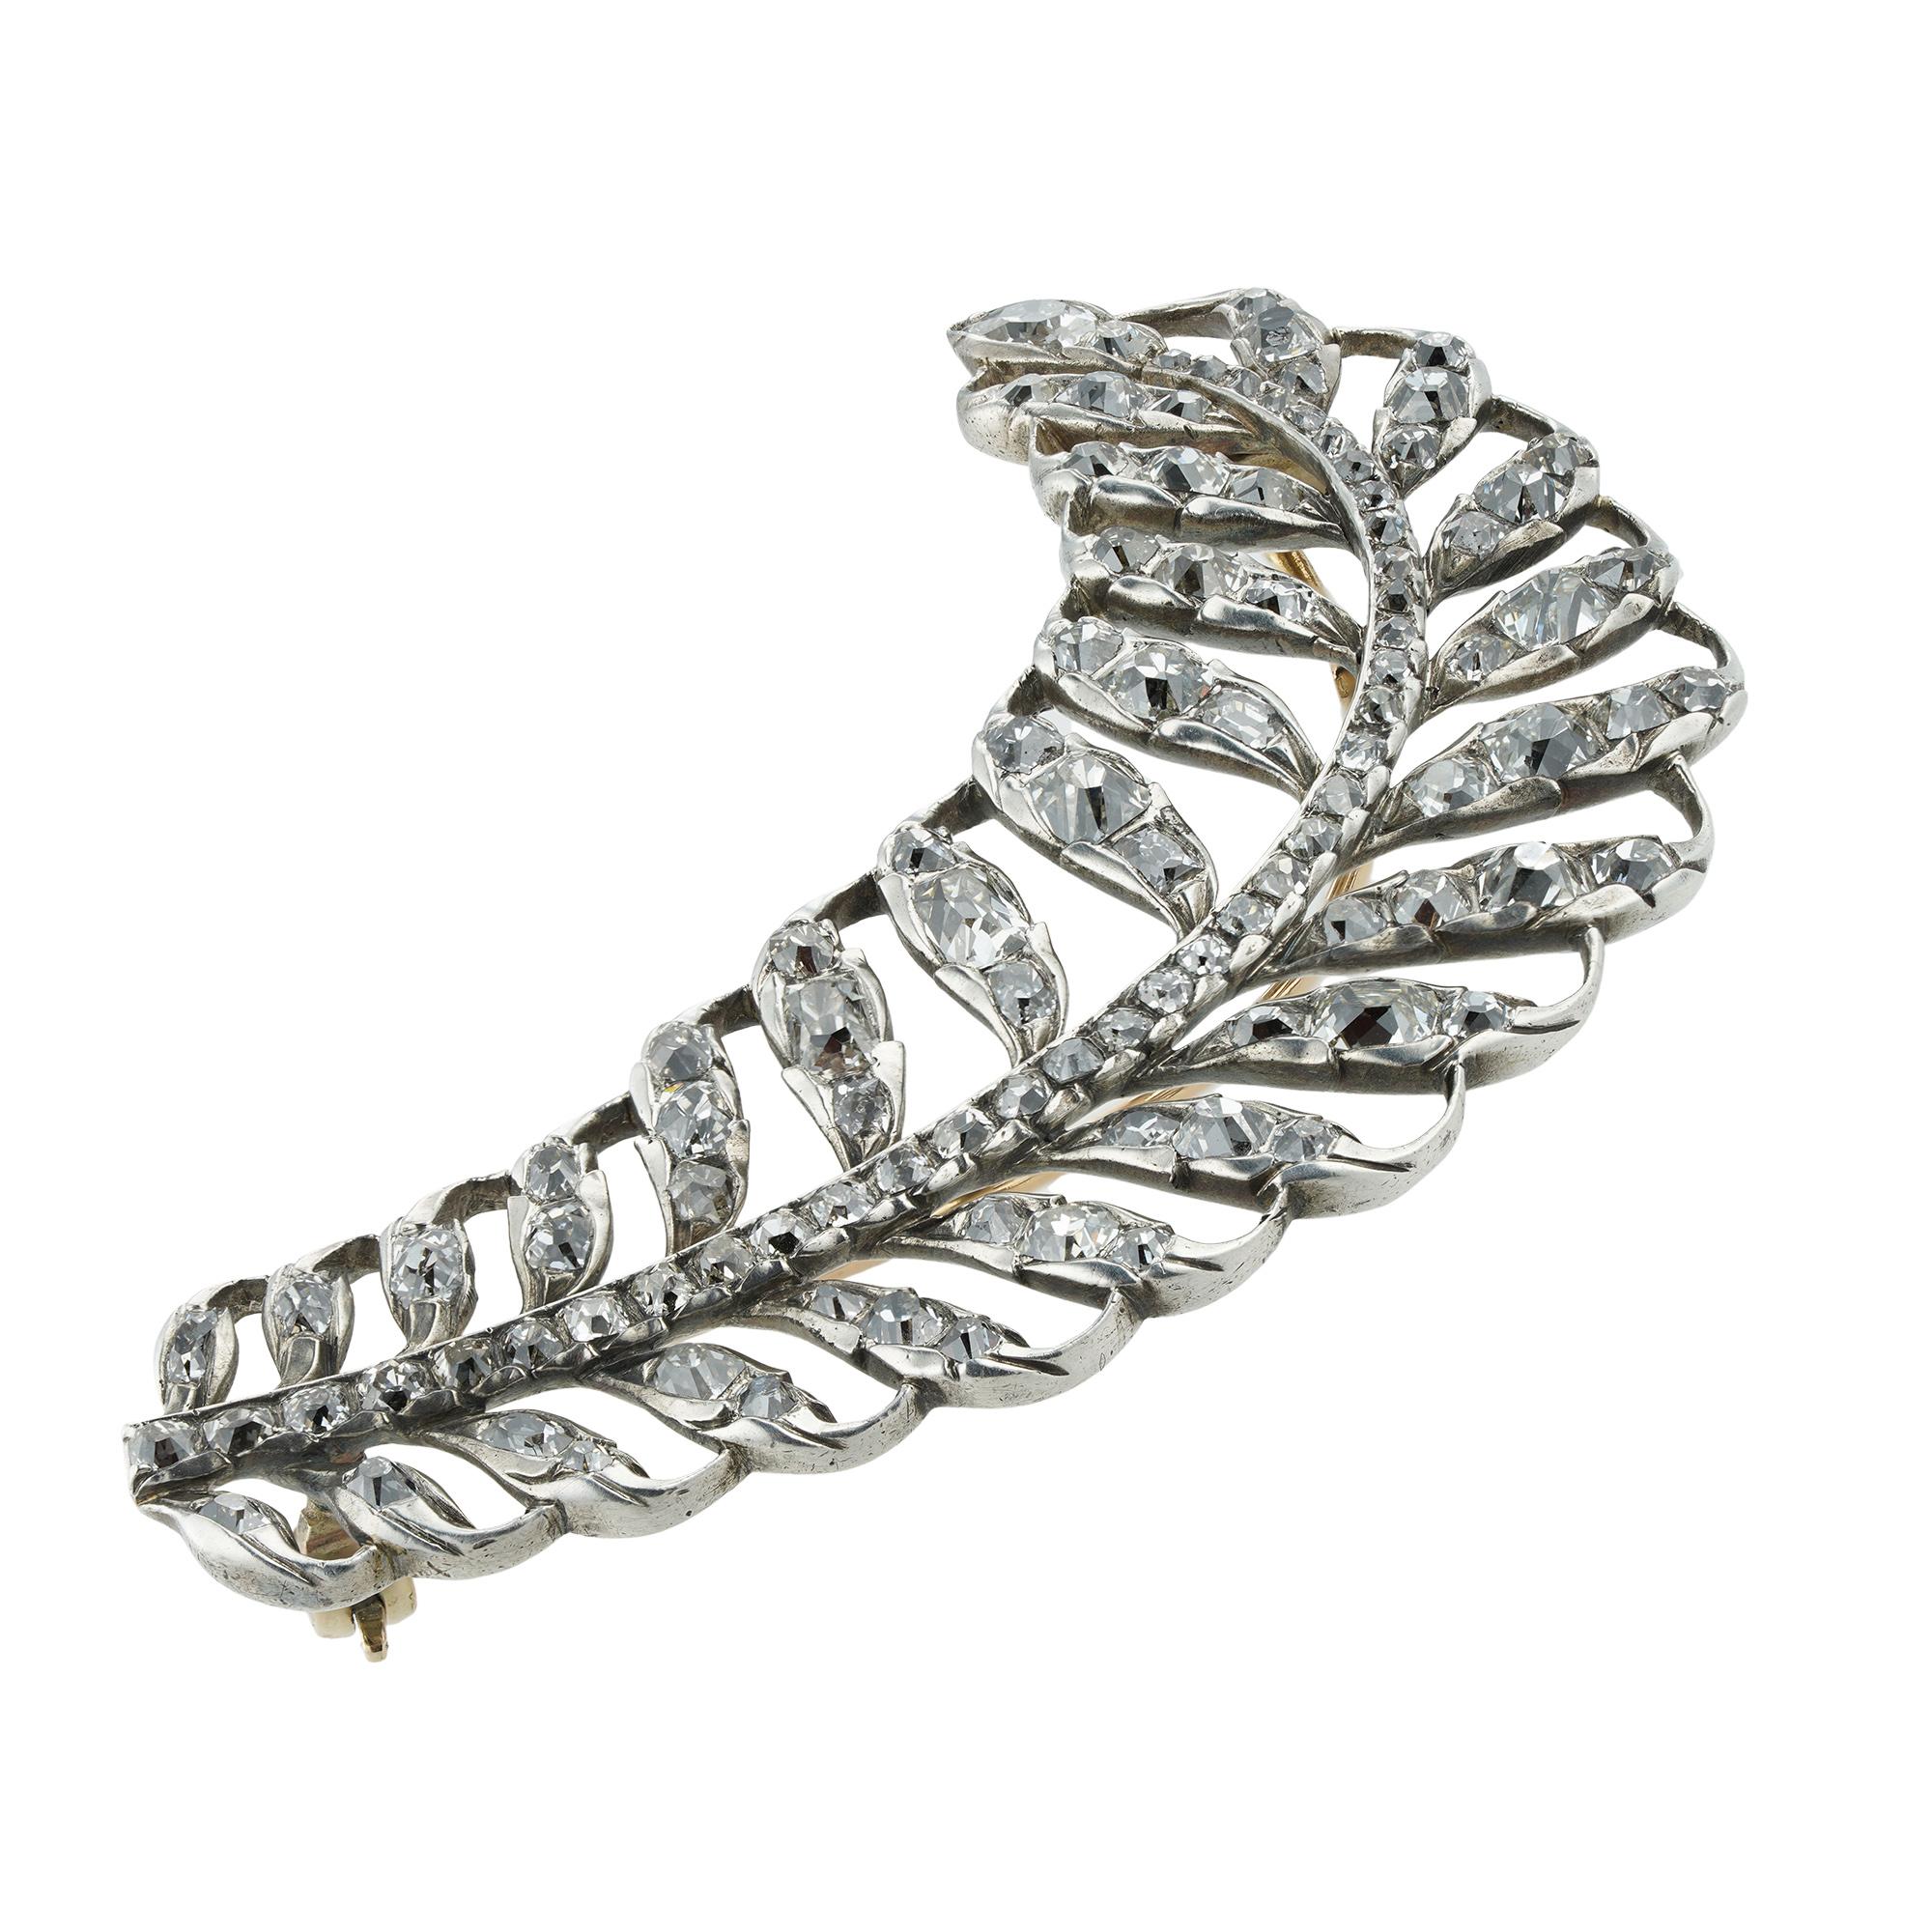 A Georgian diamond-set brooch in the form of a curved feather, set with hundred and six old-cut diamonds, estimated to weigh a total of 3 carats, all mounted in silver to a close back mount, with a rose gold brooch fitting, and later yellow gold